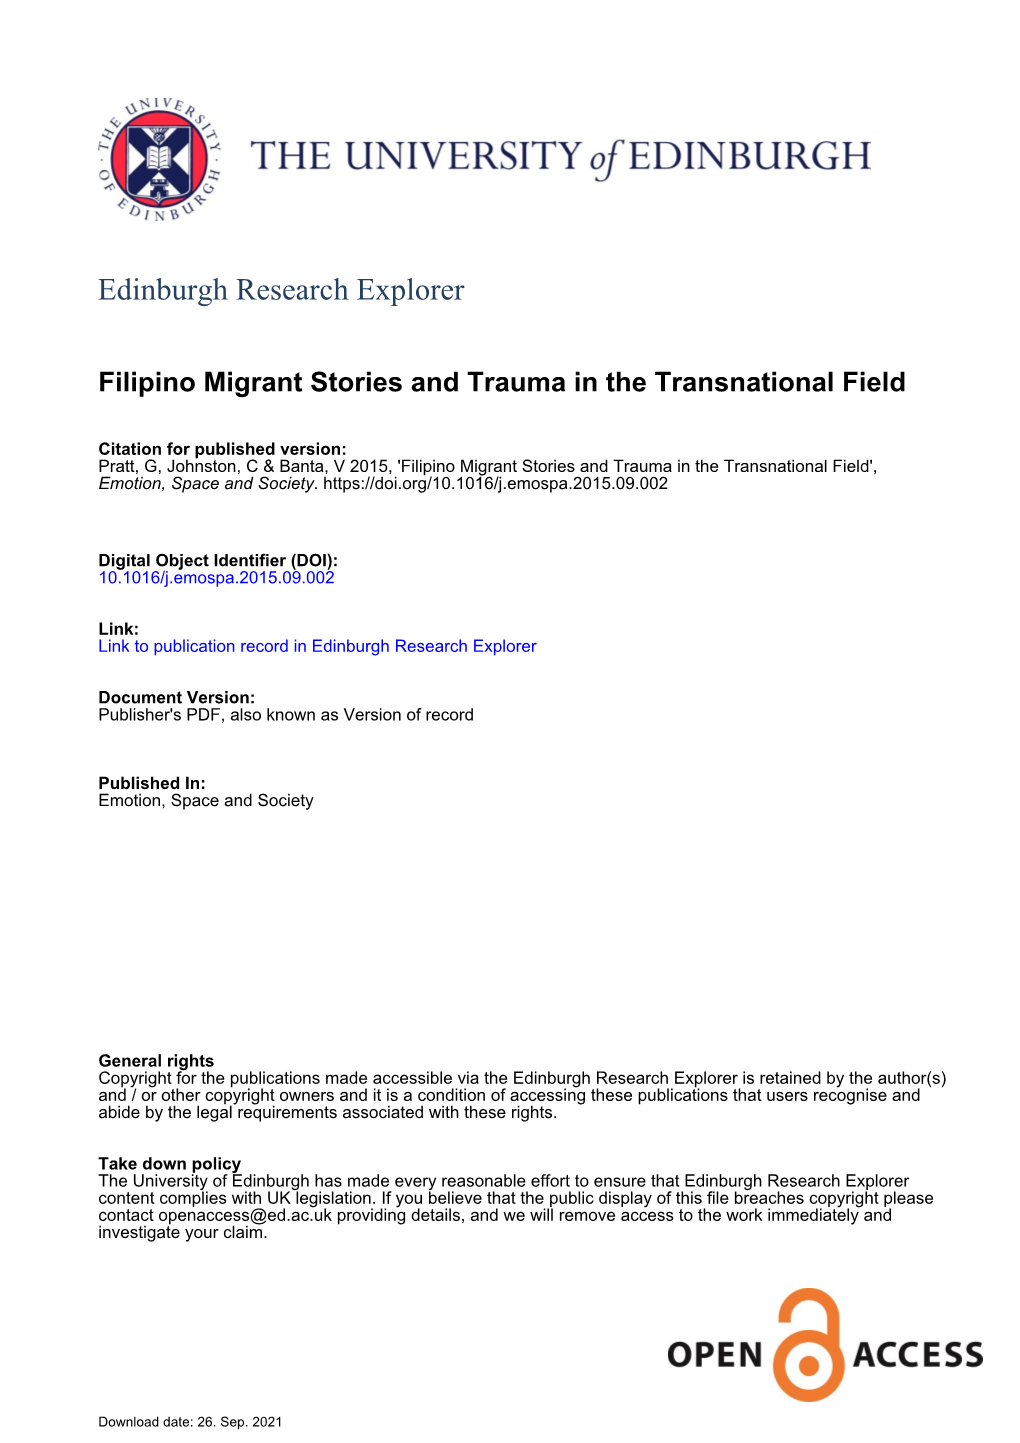 Filipino Migrant Stories and Trauma in the Transnational Field